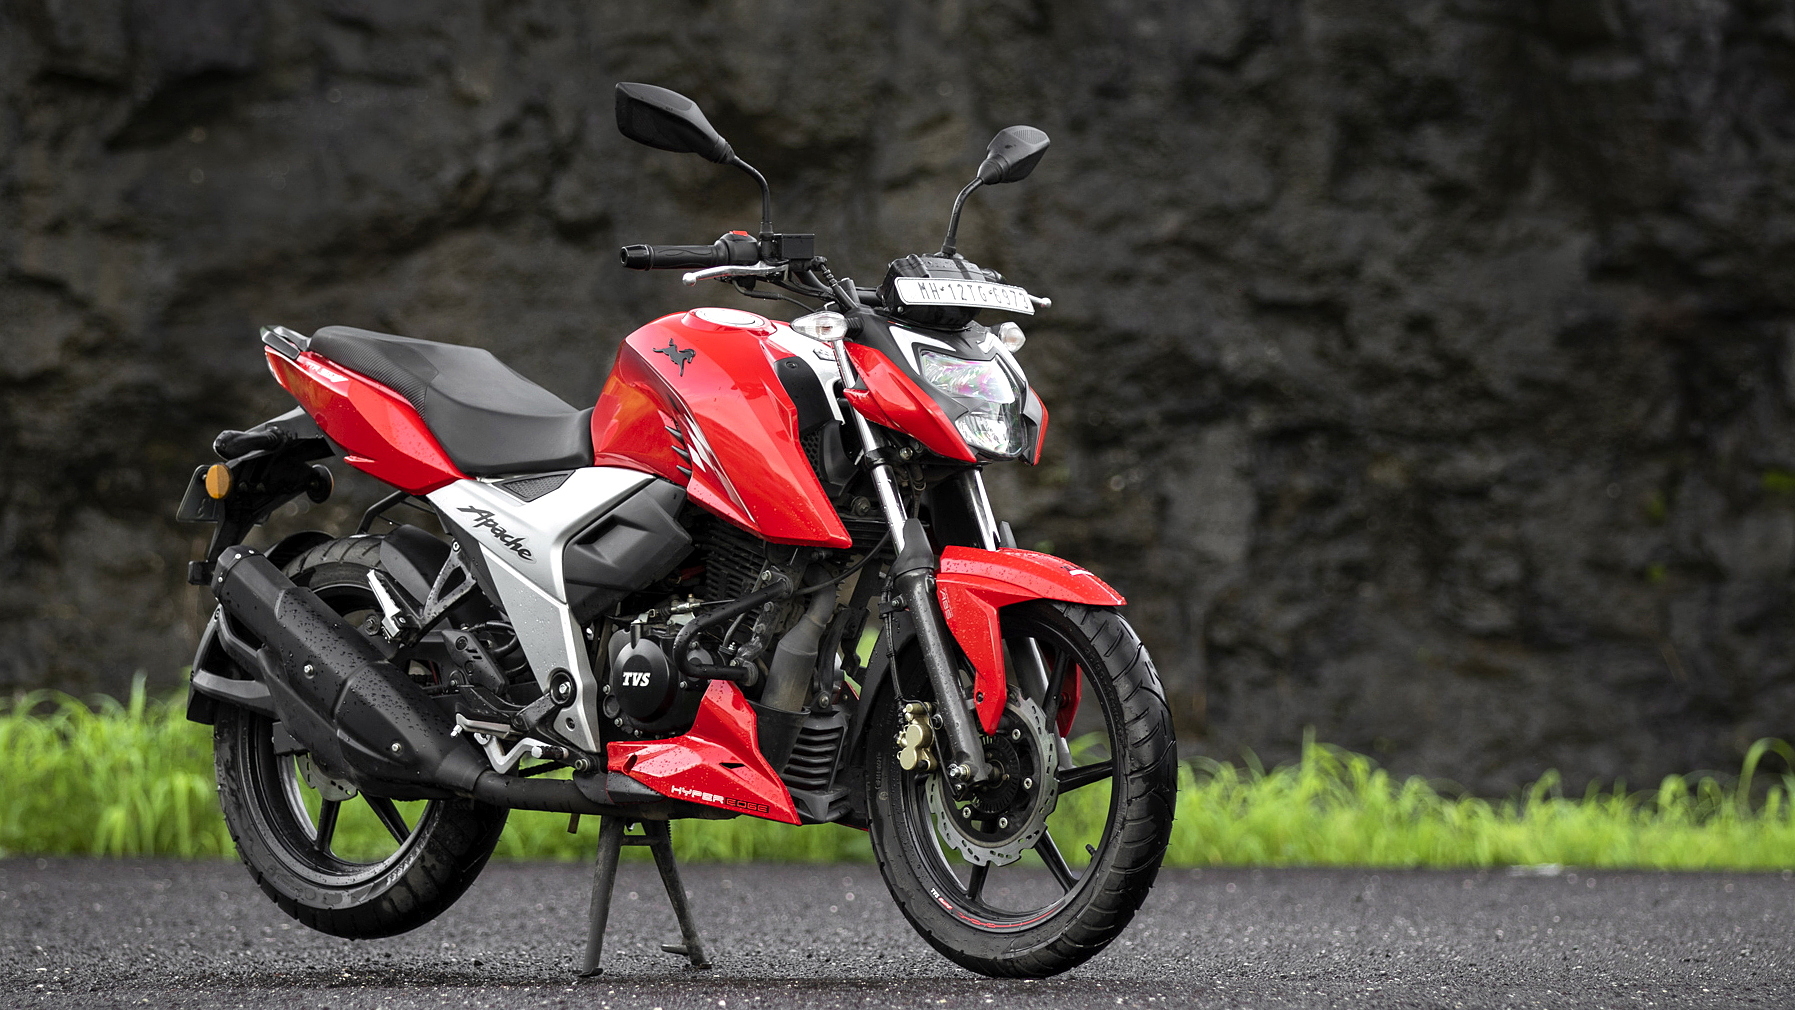 Tvs Apache Rtr 160 4v Racing Red Colour Apache Rtr 160 4v Colours In India Bikewale